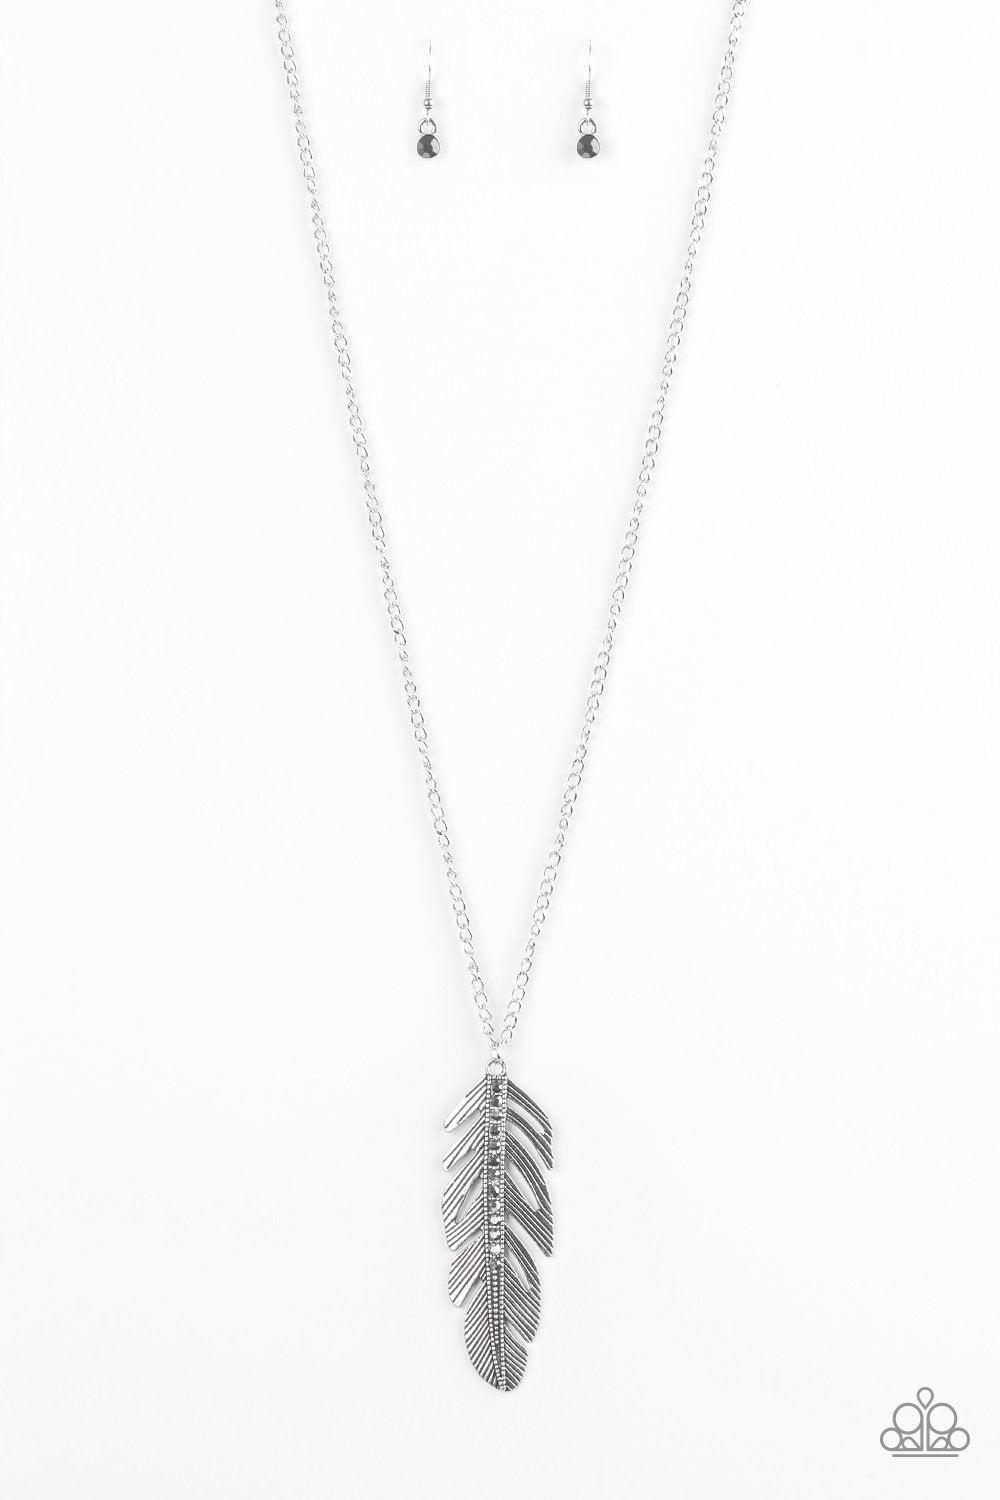 Sky Quest Silver Feather Necklace - Paparazzi Accessories-CarasShop.com - $5 Jewelry by Cara Jewels